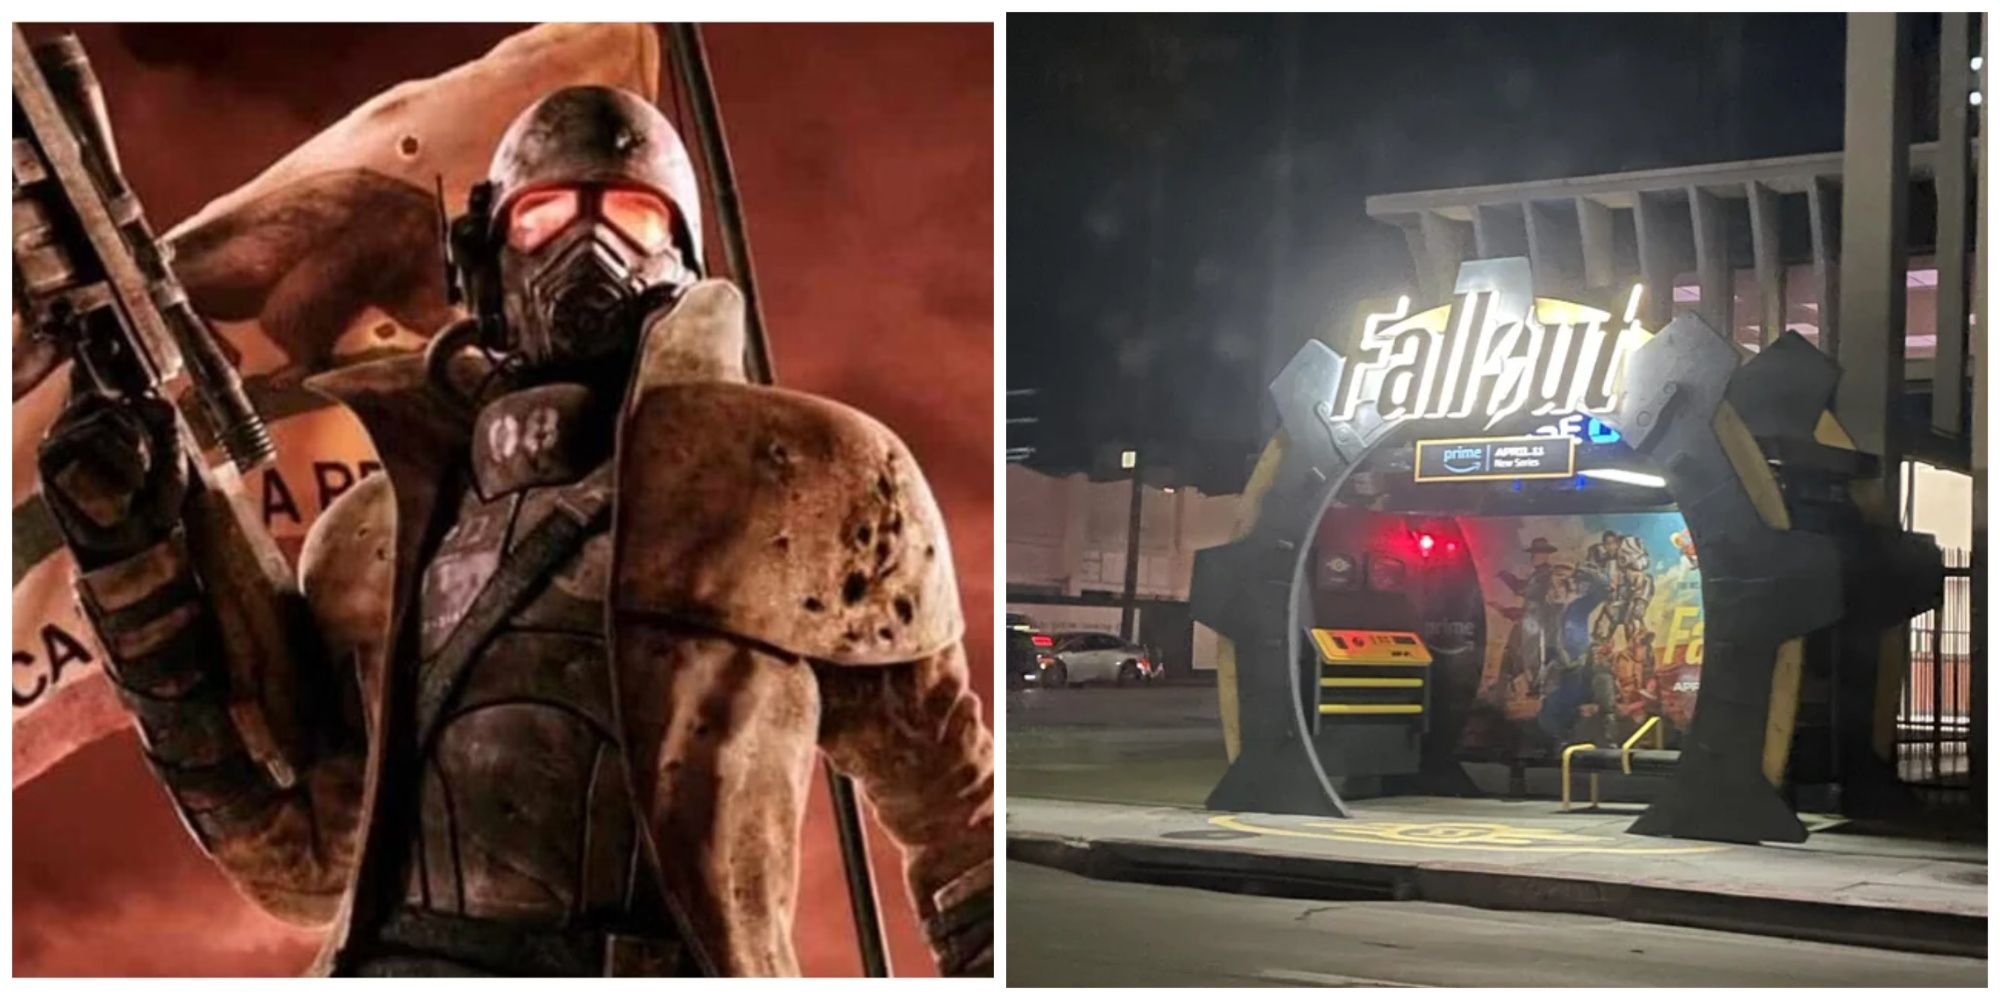 Fallout bus stop featured image